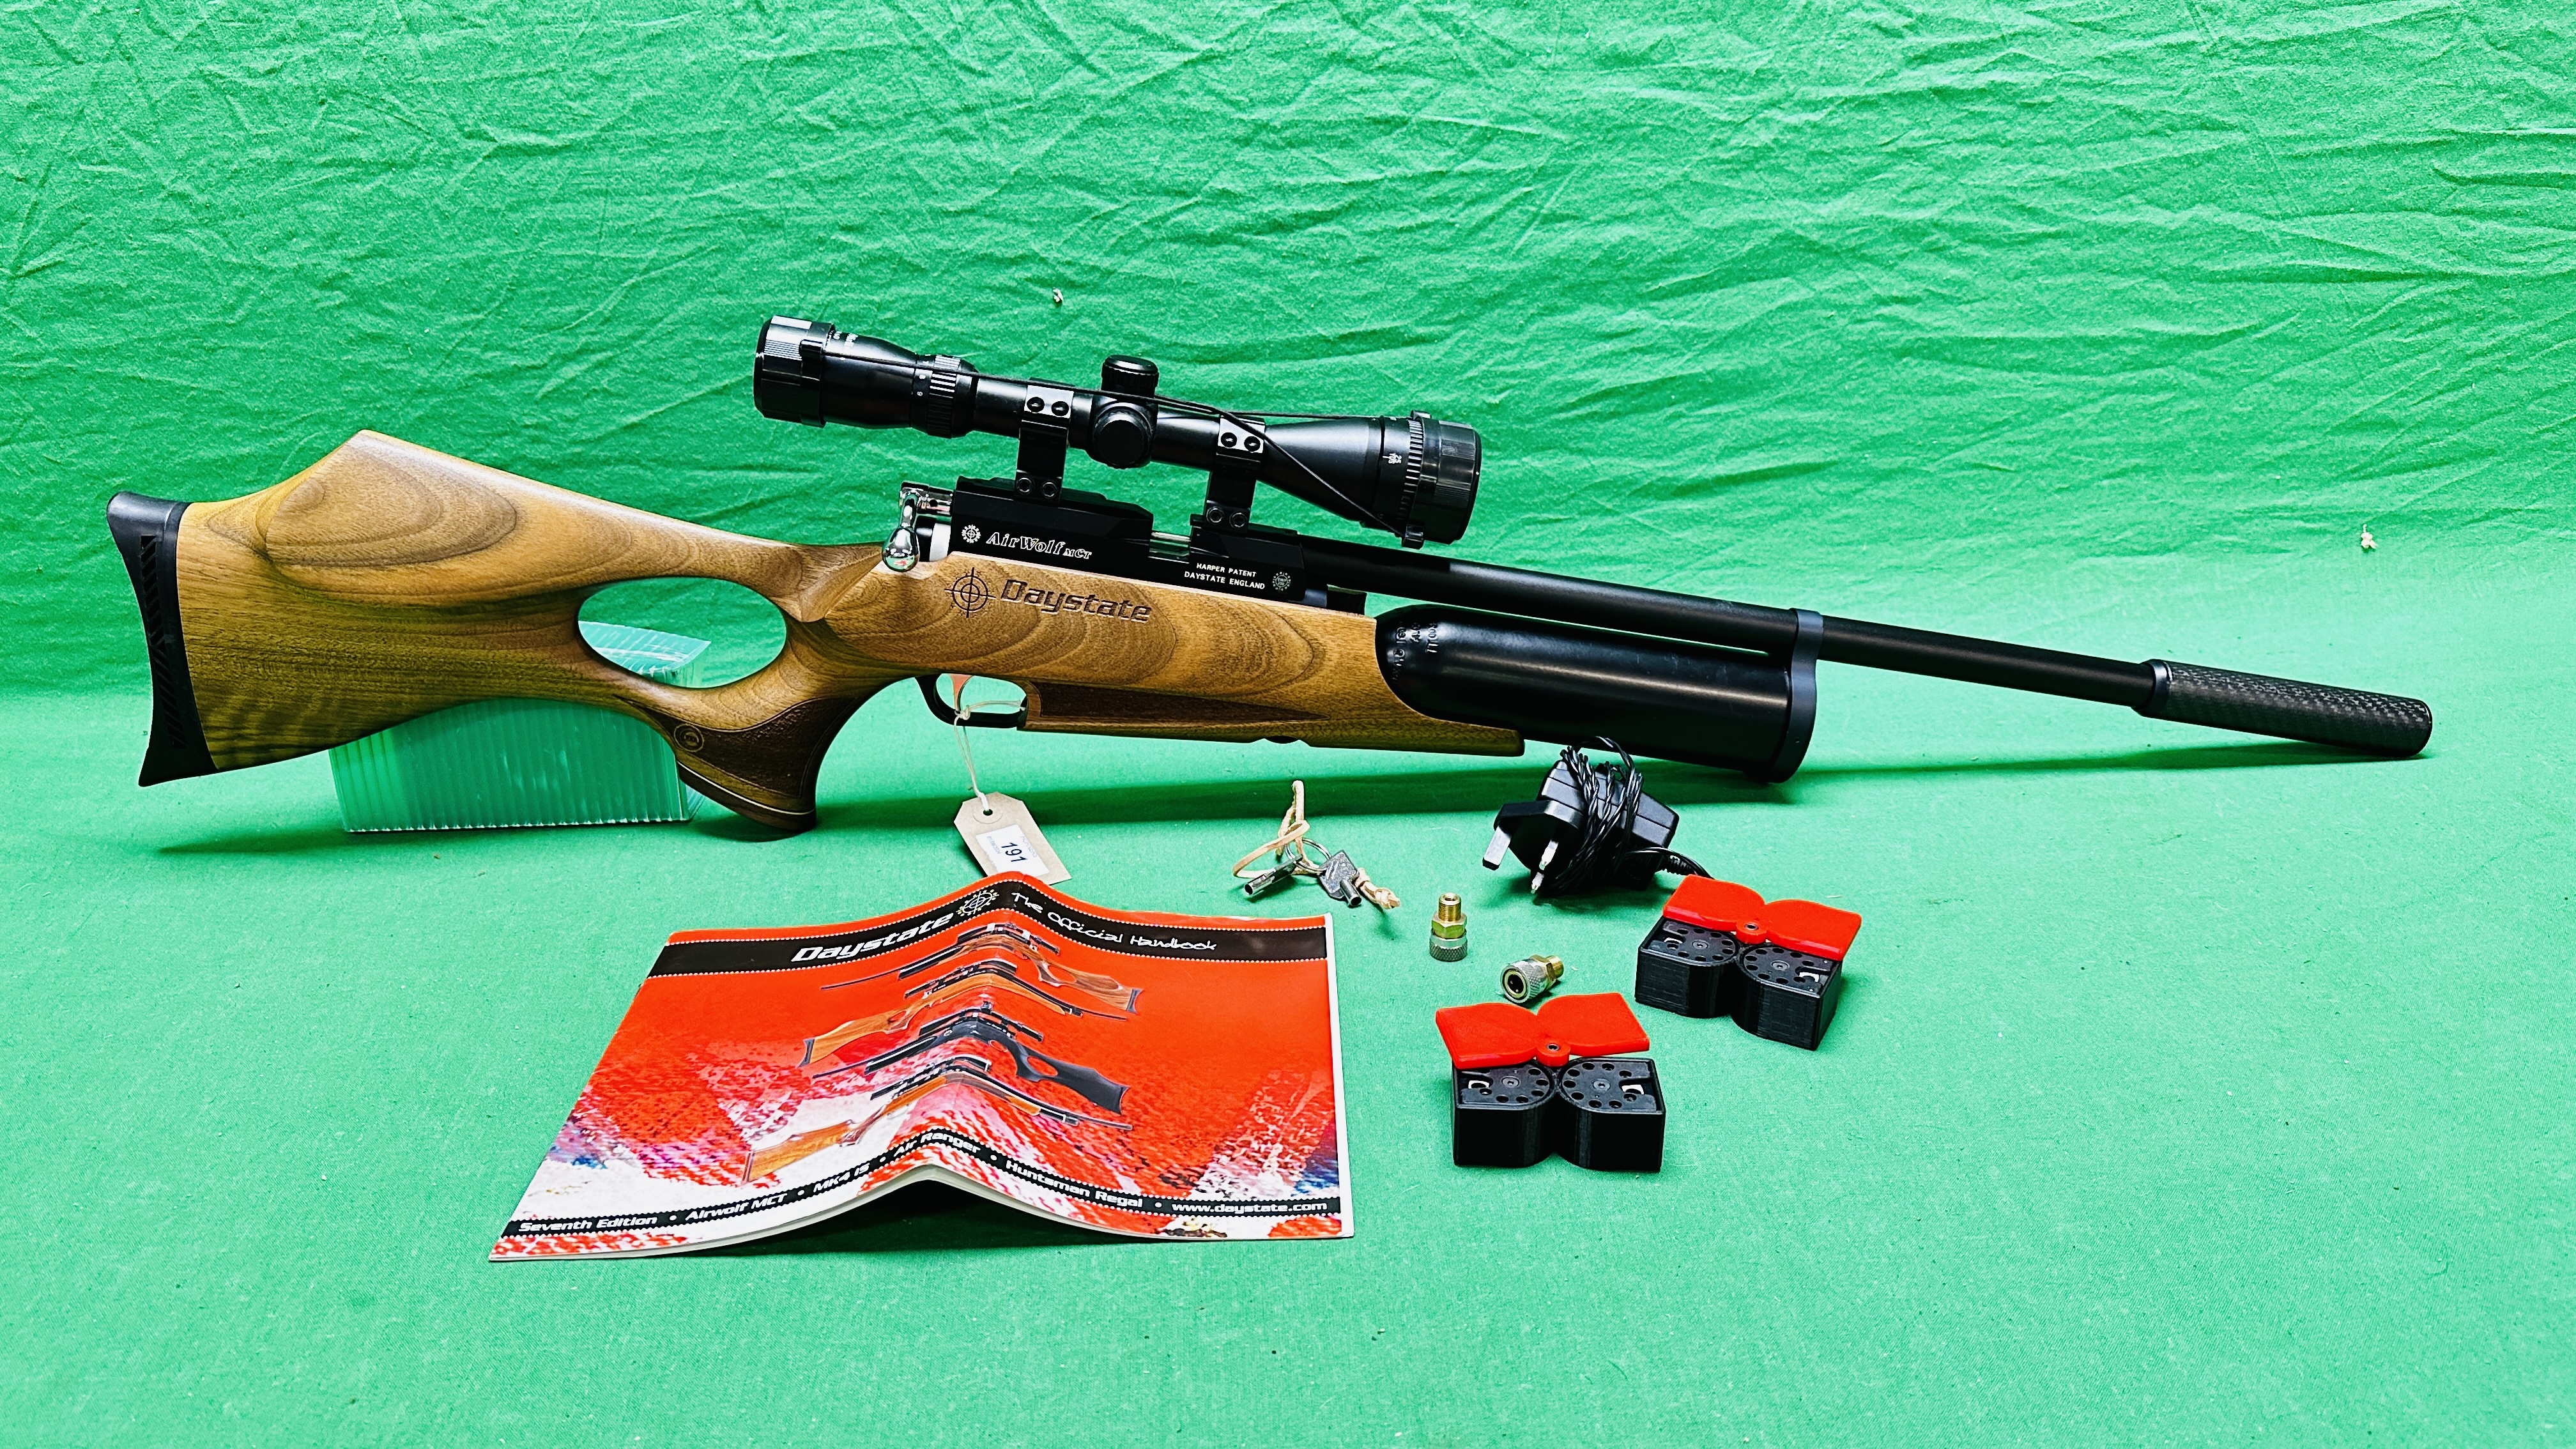 DAYSTATE AIRWOLF MCT DIGITAL PCP MULTI SHOT AIR RIFLE COMPLETE WITH 4 10 SHOT MAGAZINES,